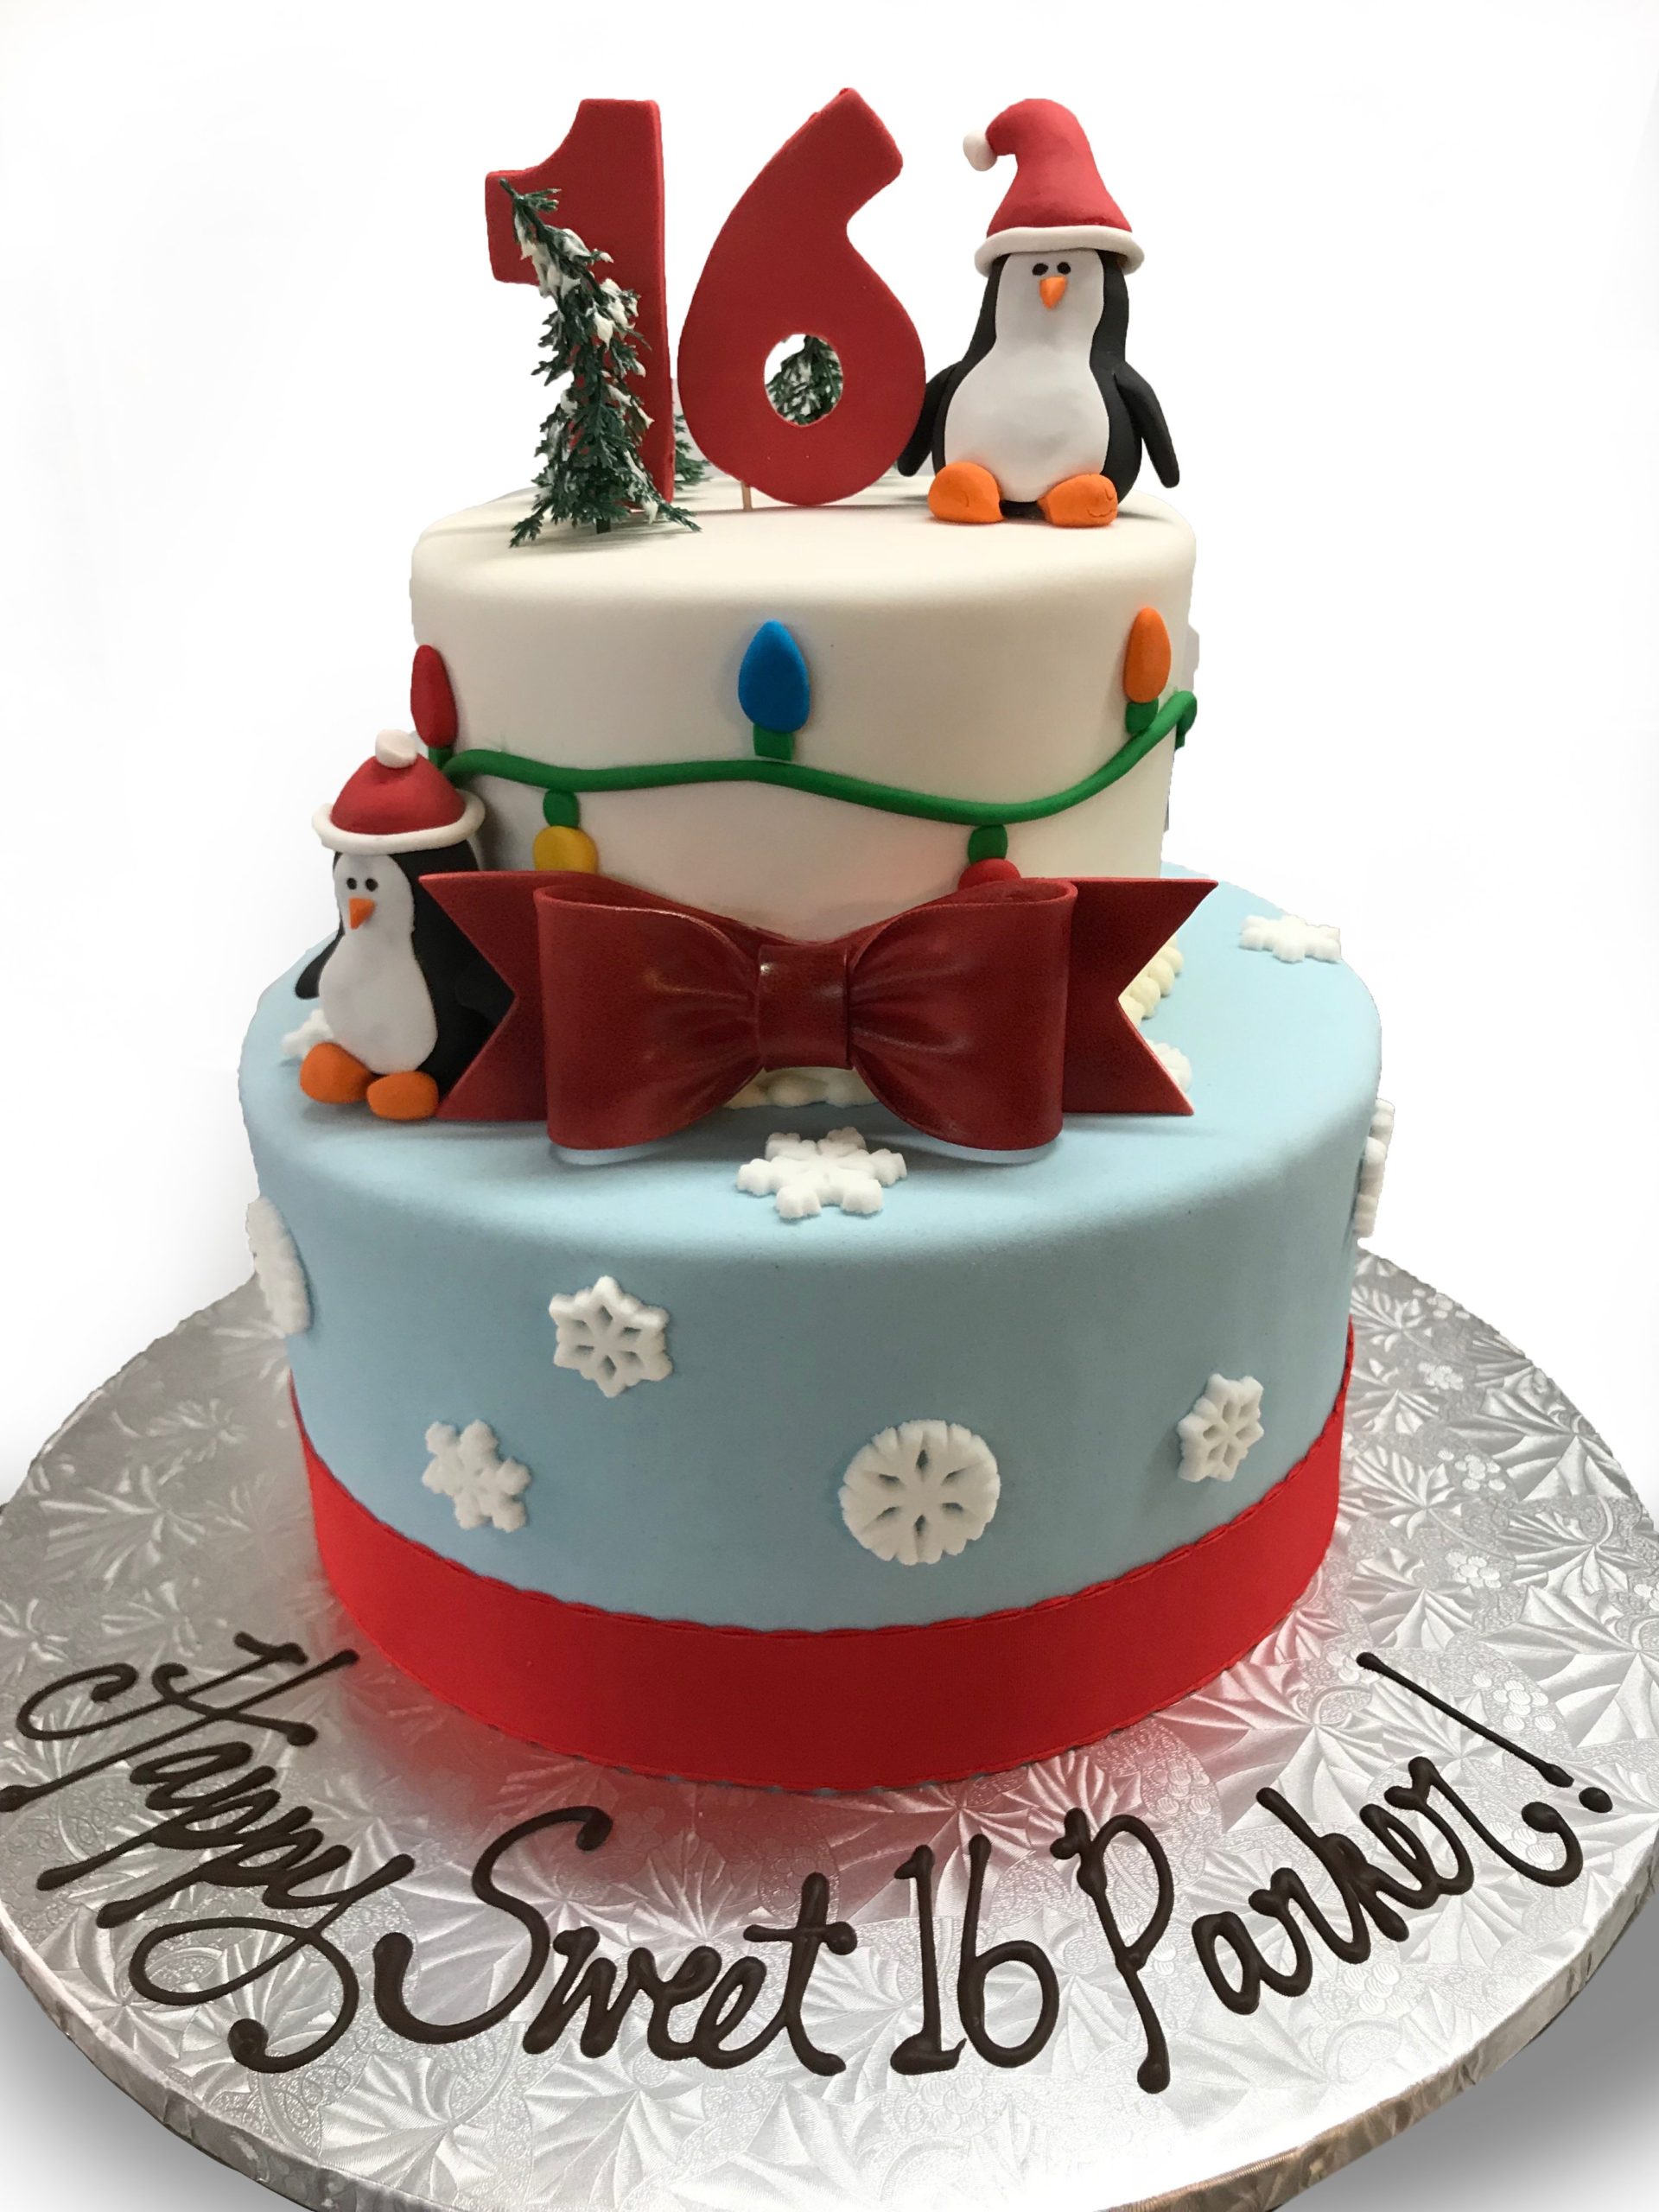 Fondant covered two tier birthday cake with fondant penguins and lights and sugar snowflakes